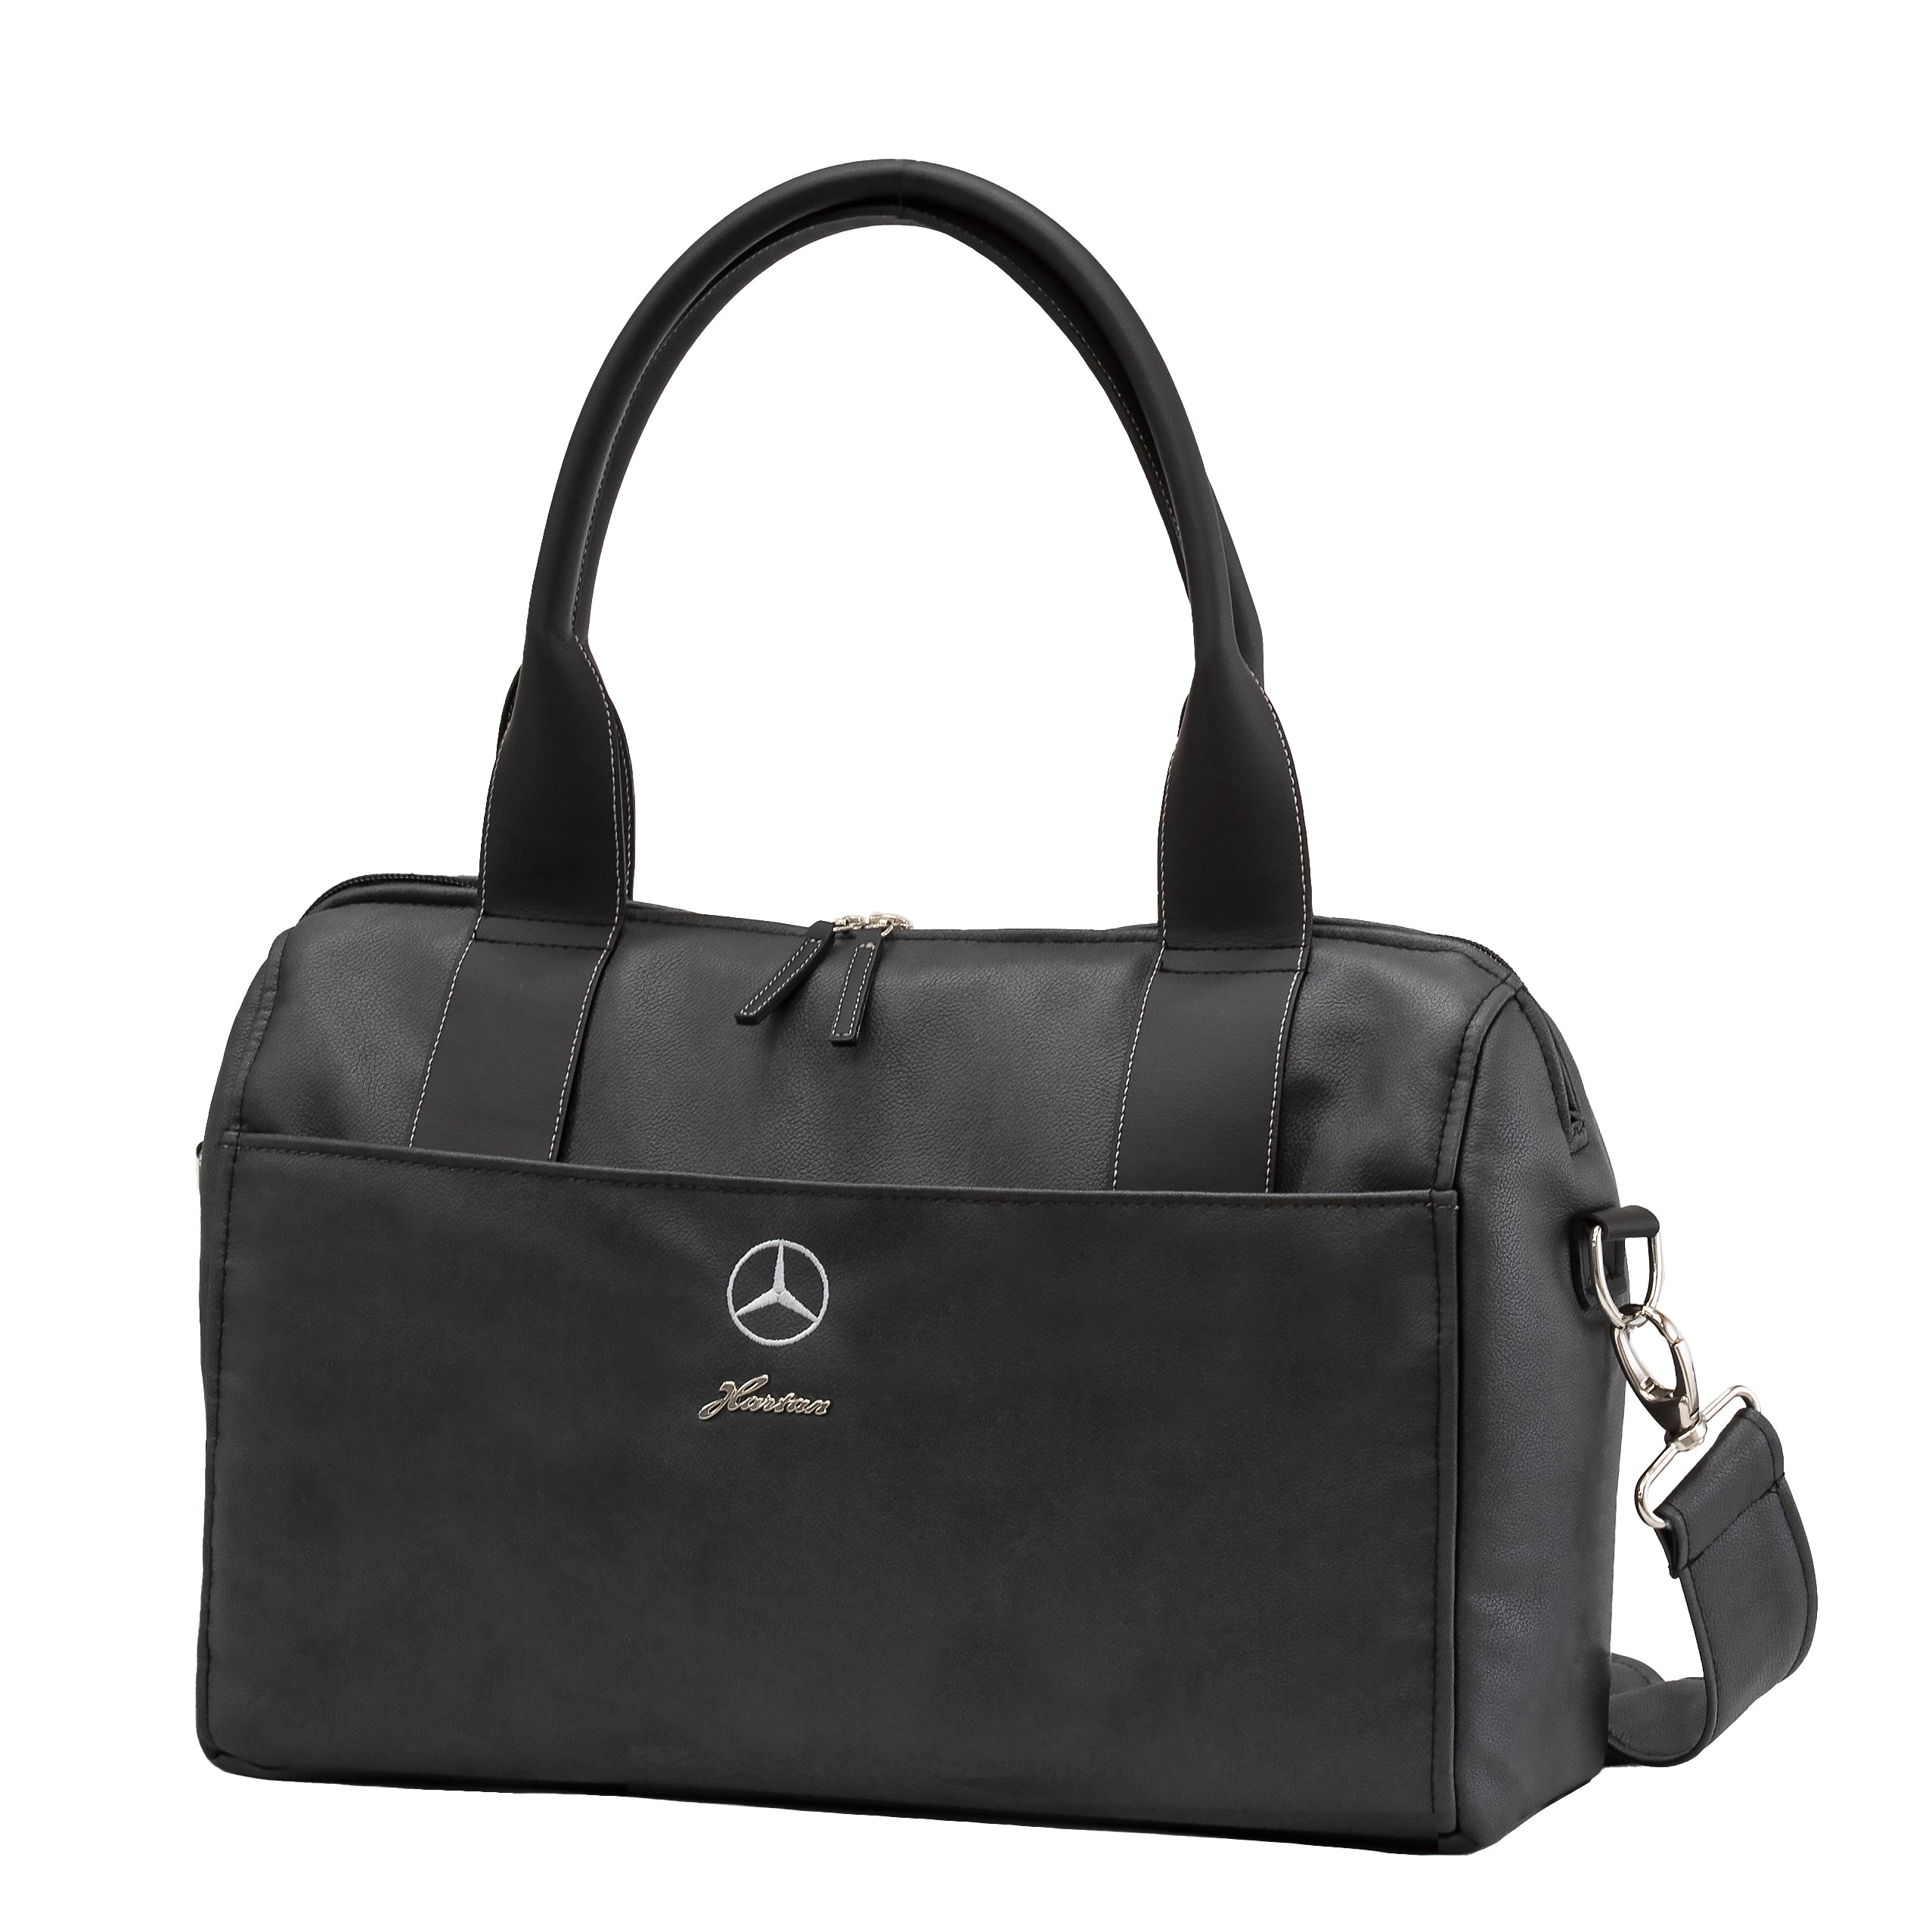 Mercedes Benz Crocodile Leather Bags With Wallets - Tana Elegant